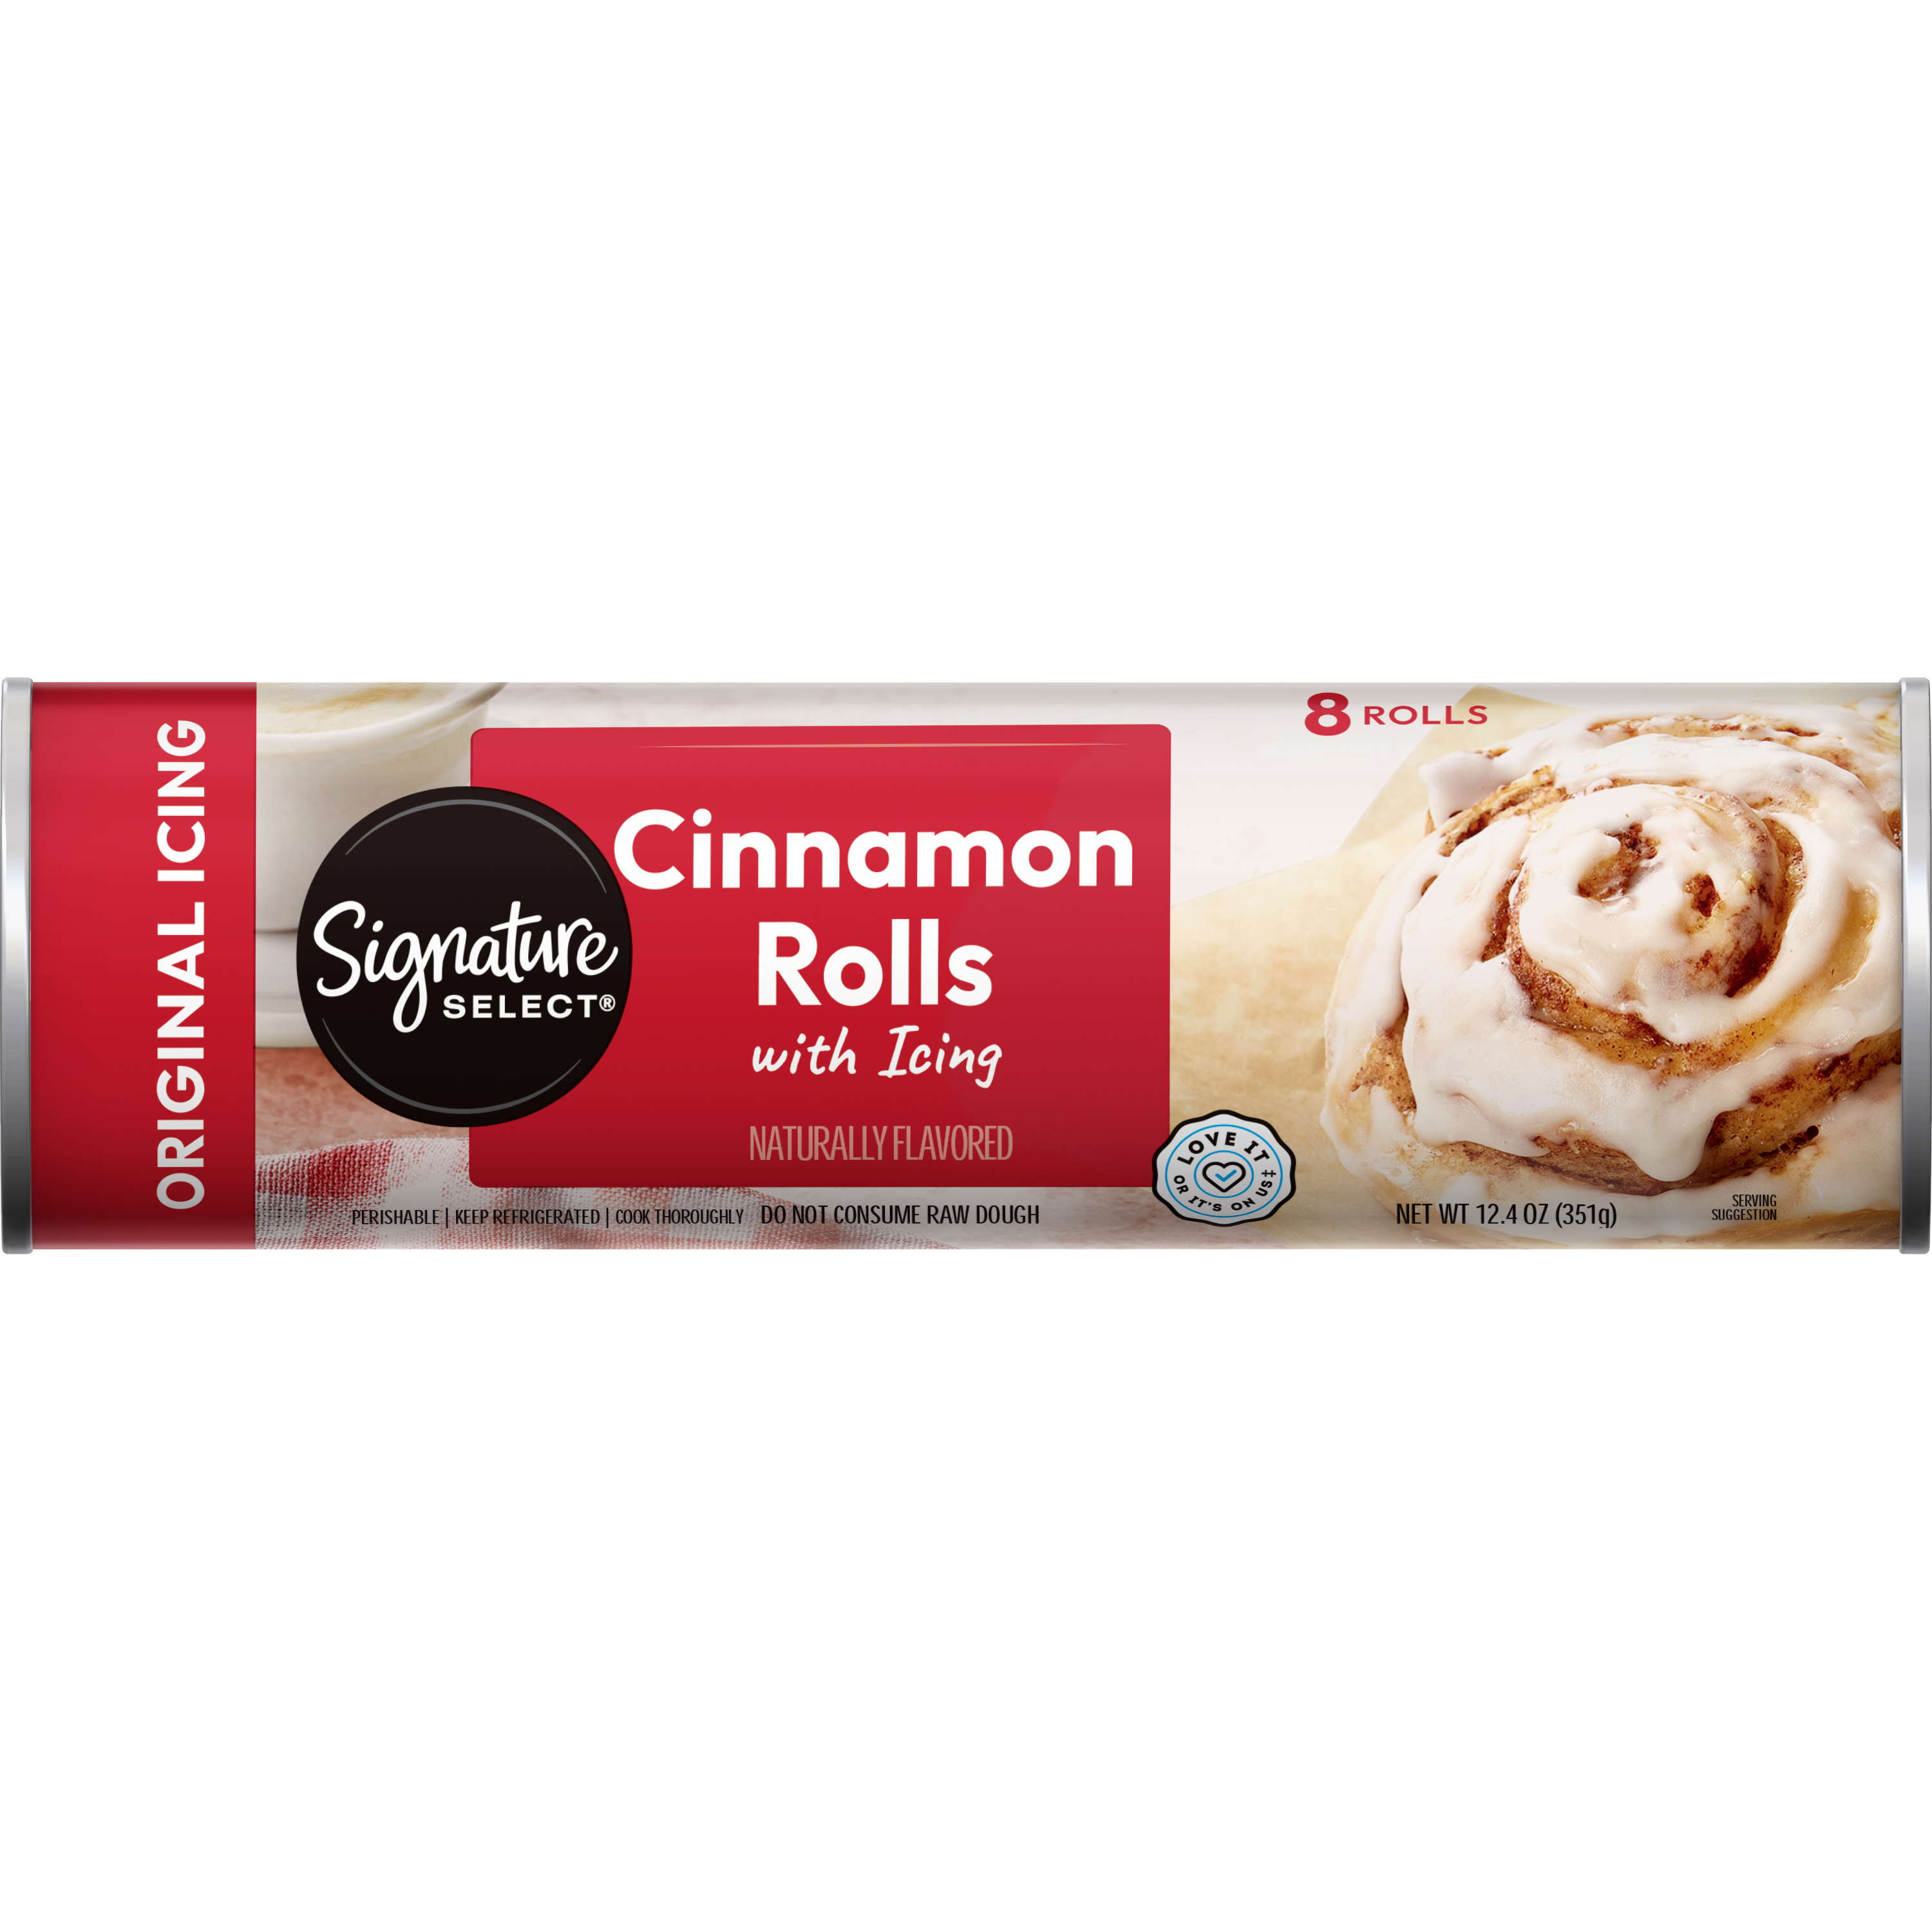 Packaging of Signature Select Cinnamon Rolls with icing, displaying 8 rolls and a Quality Assurance seal